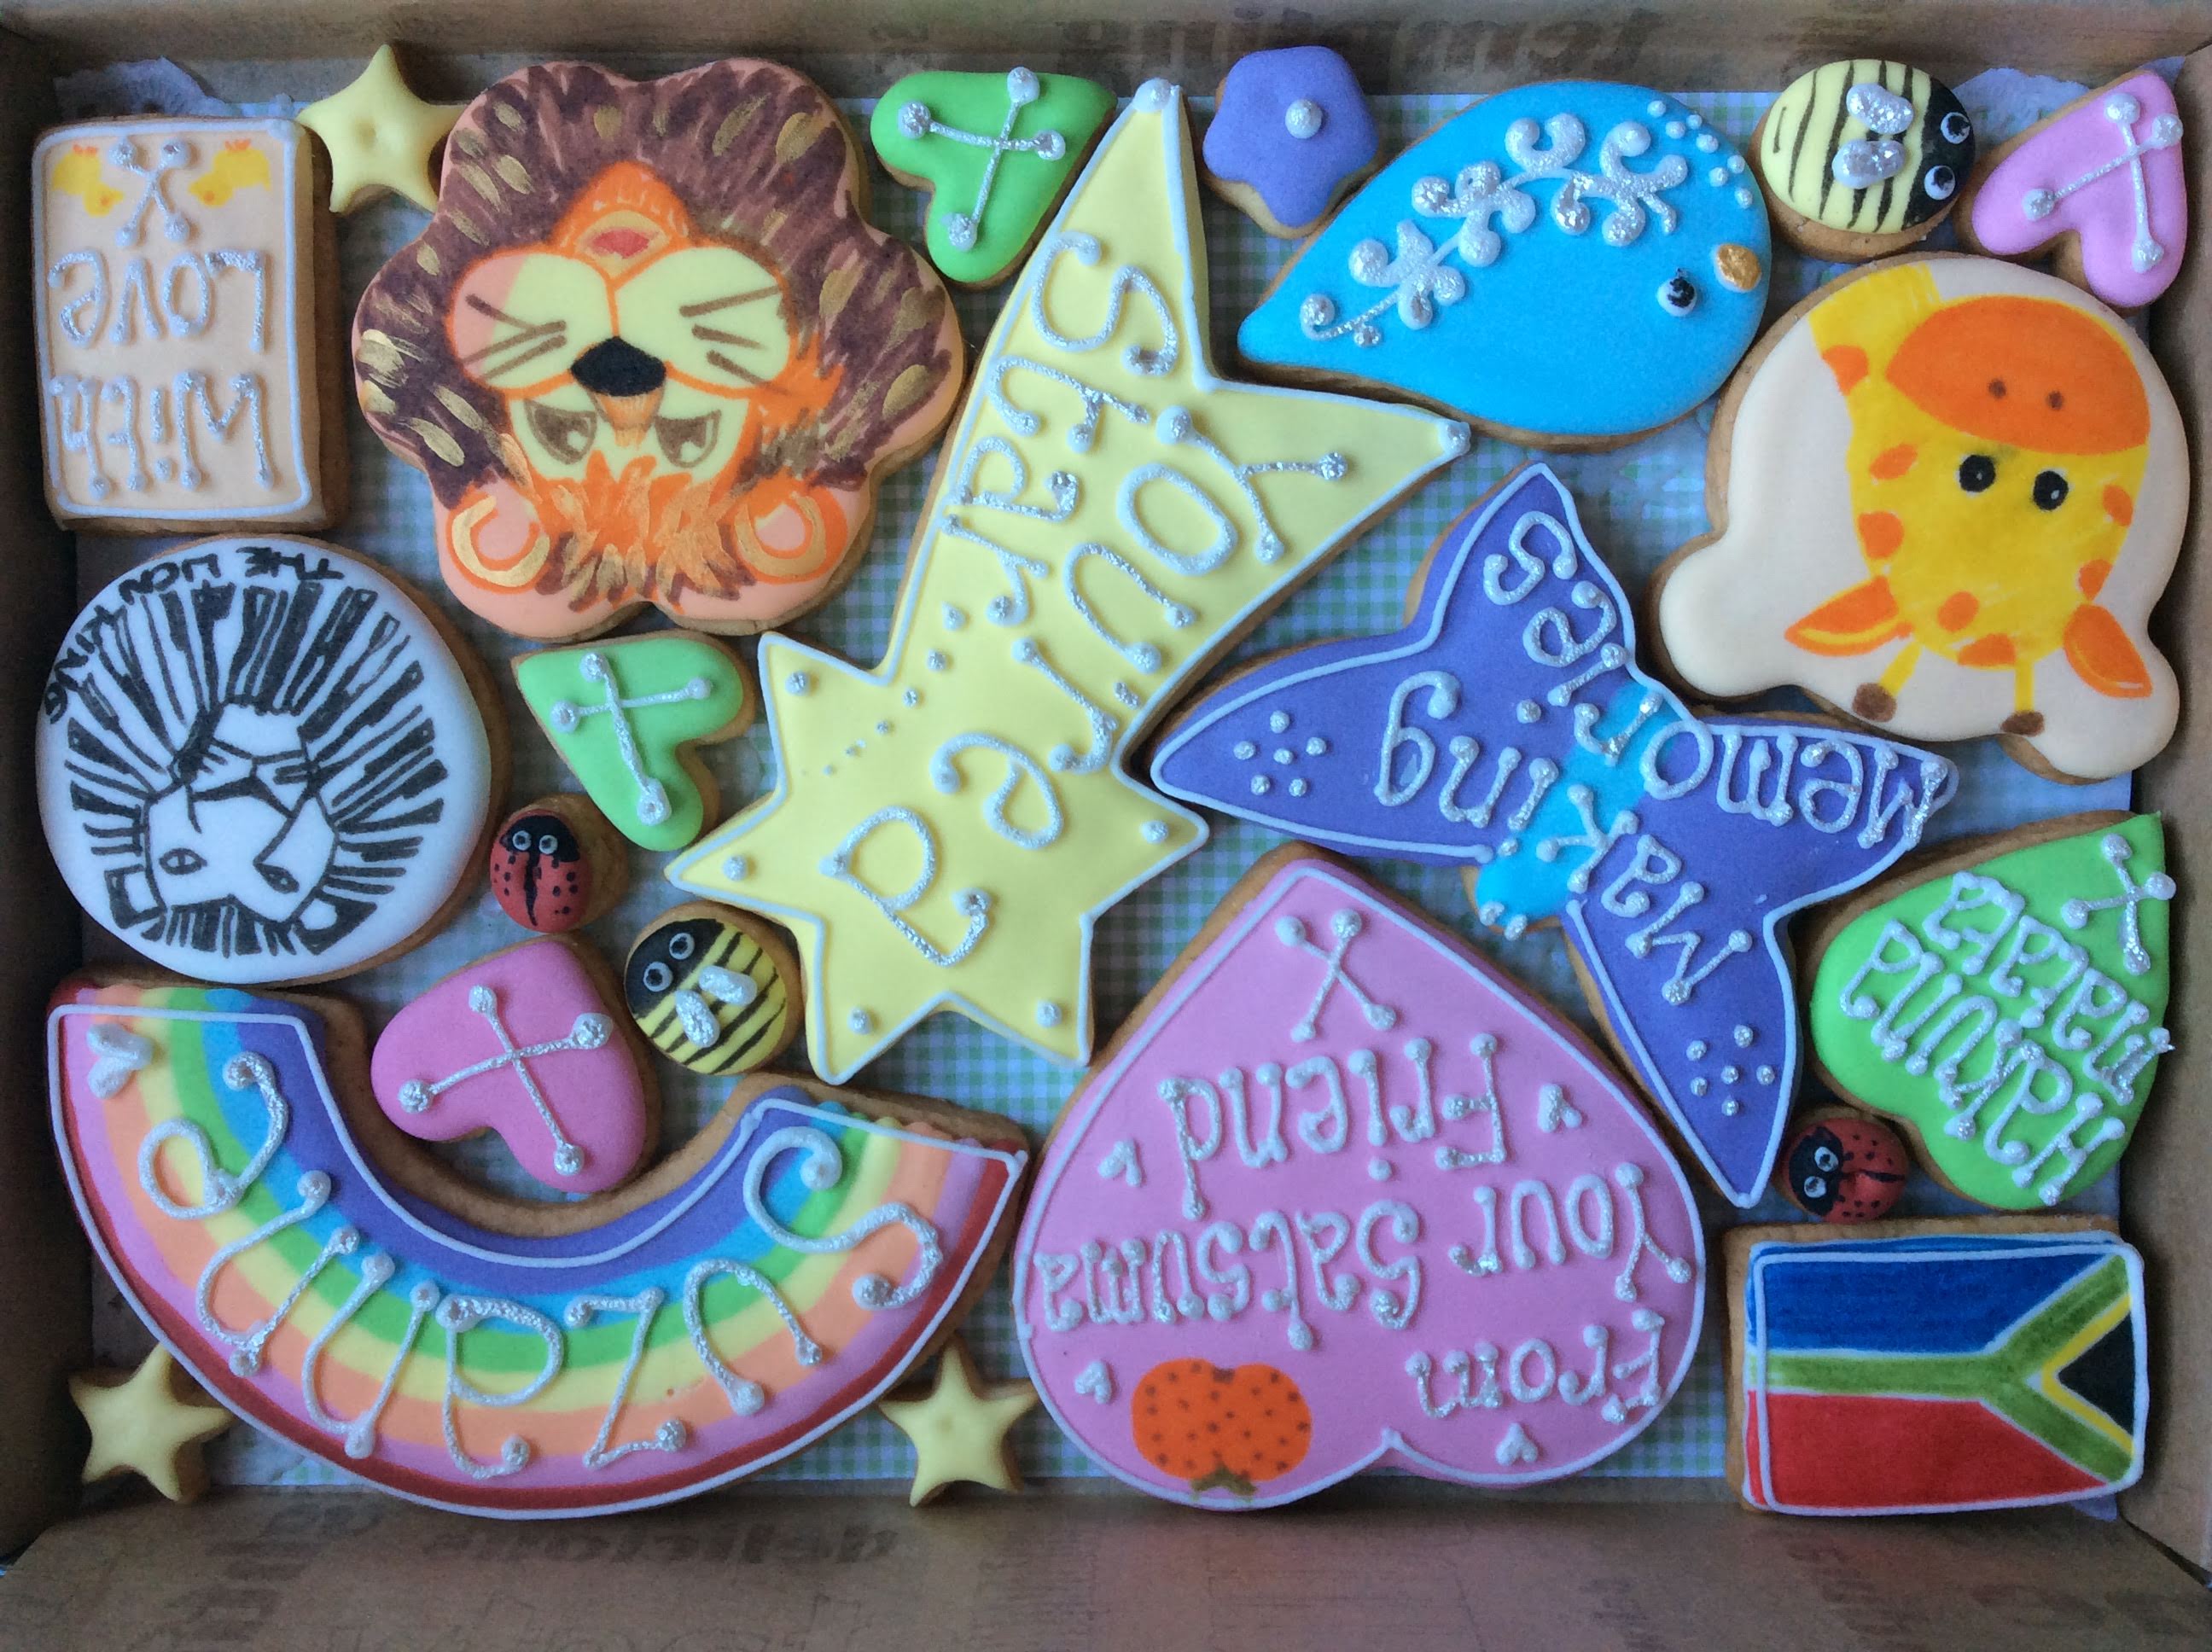 Bespoke Cookie Box - A Story in a Box (Large)